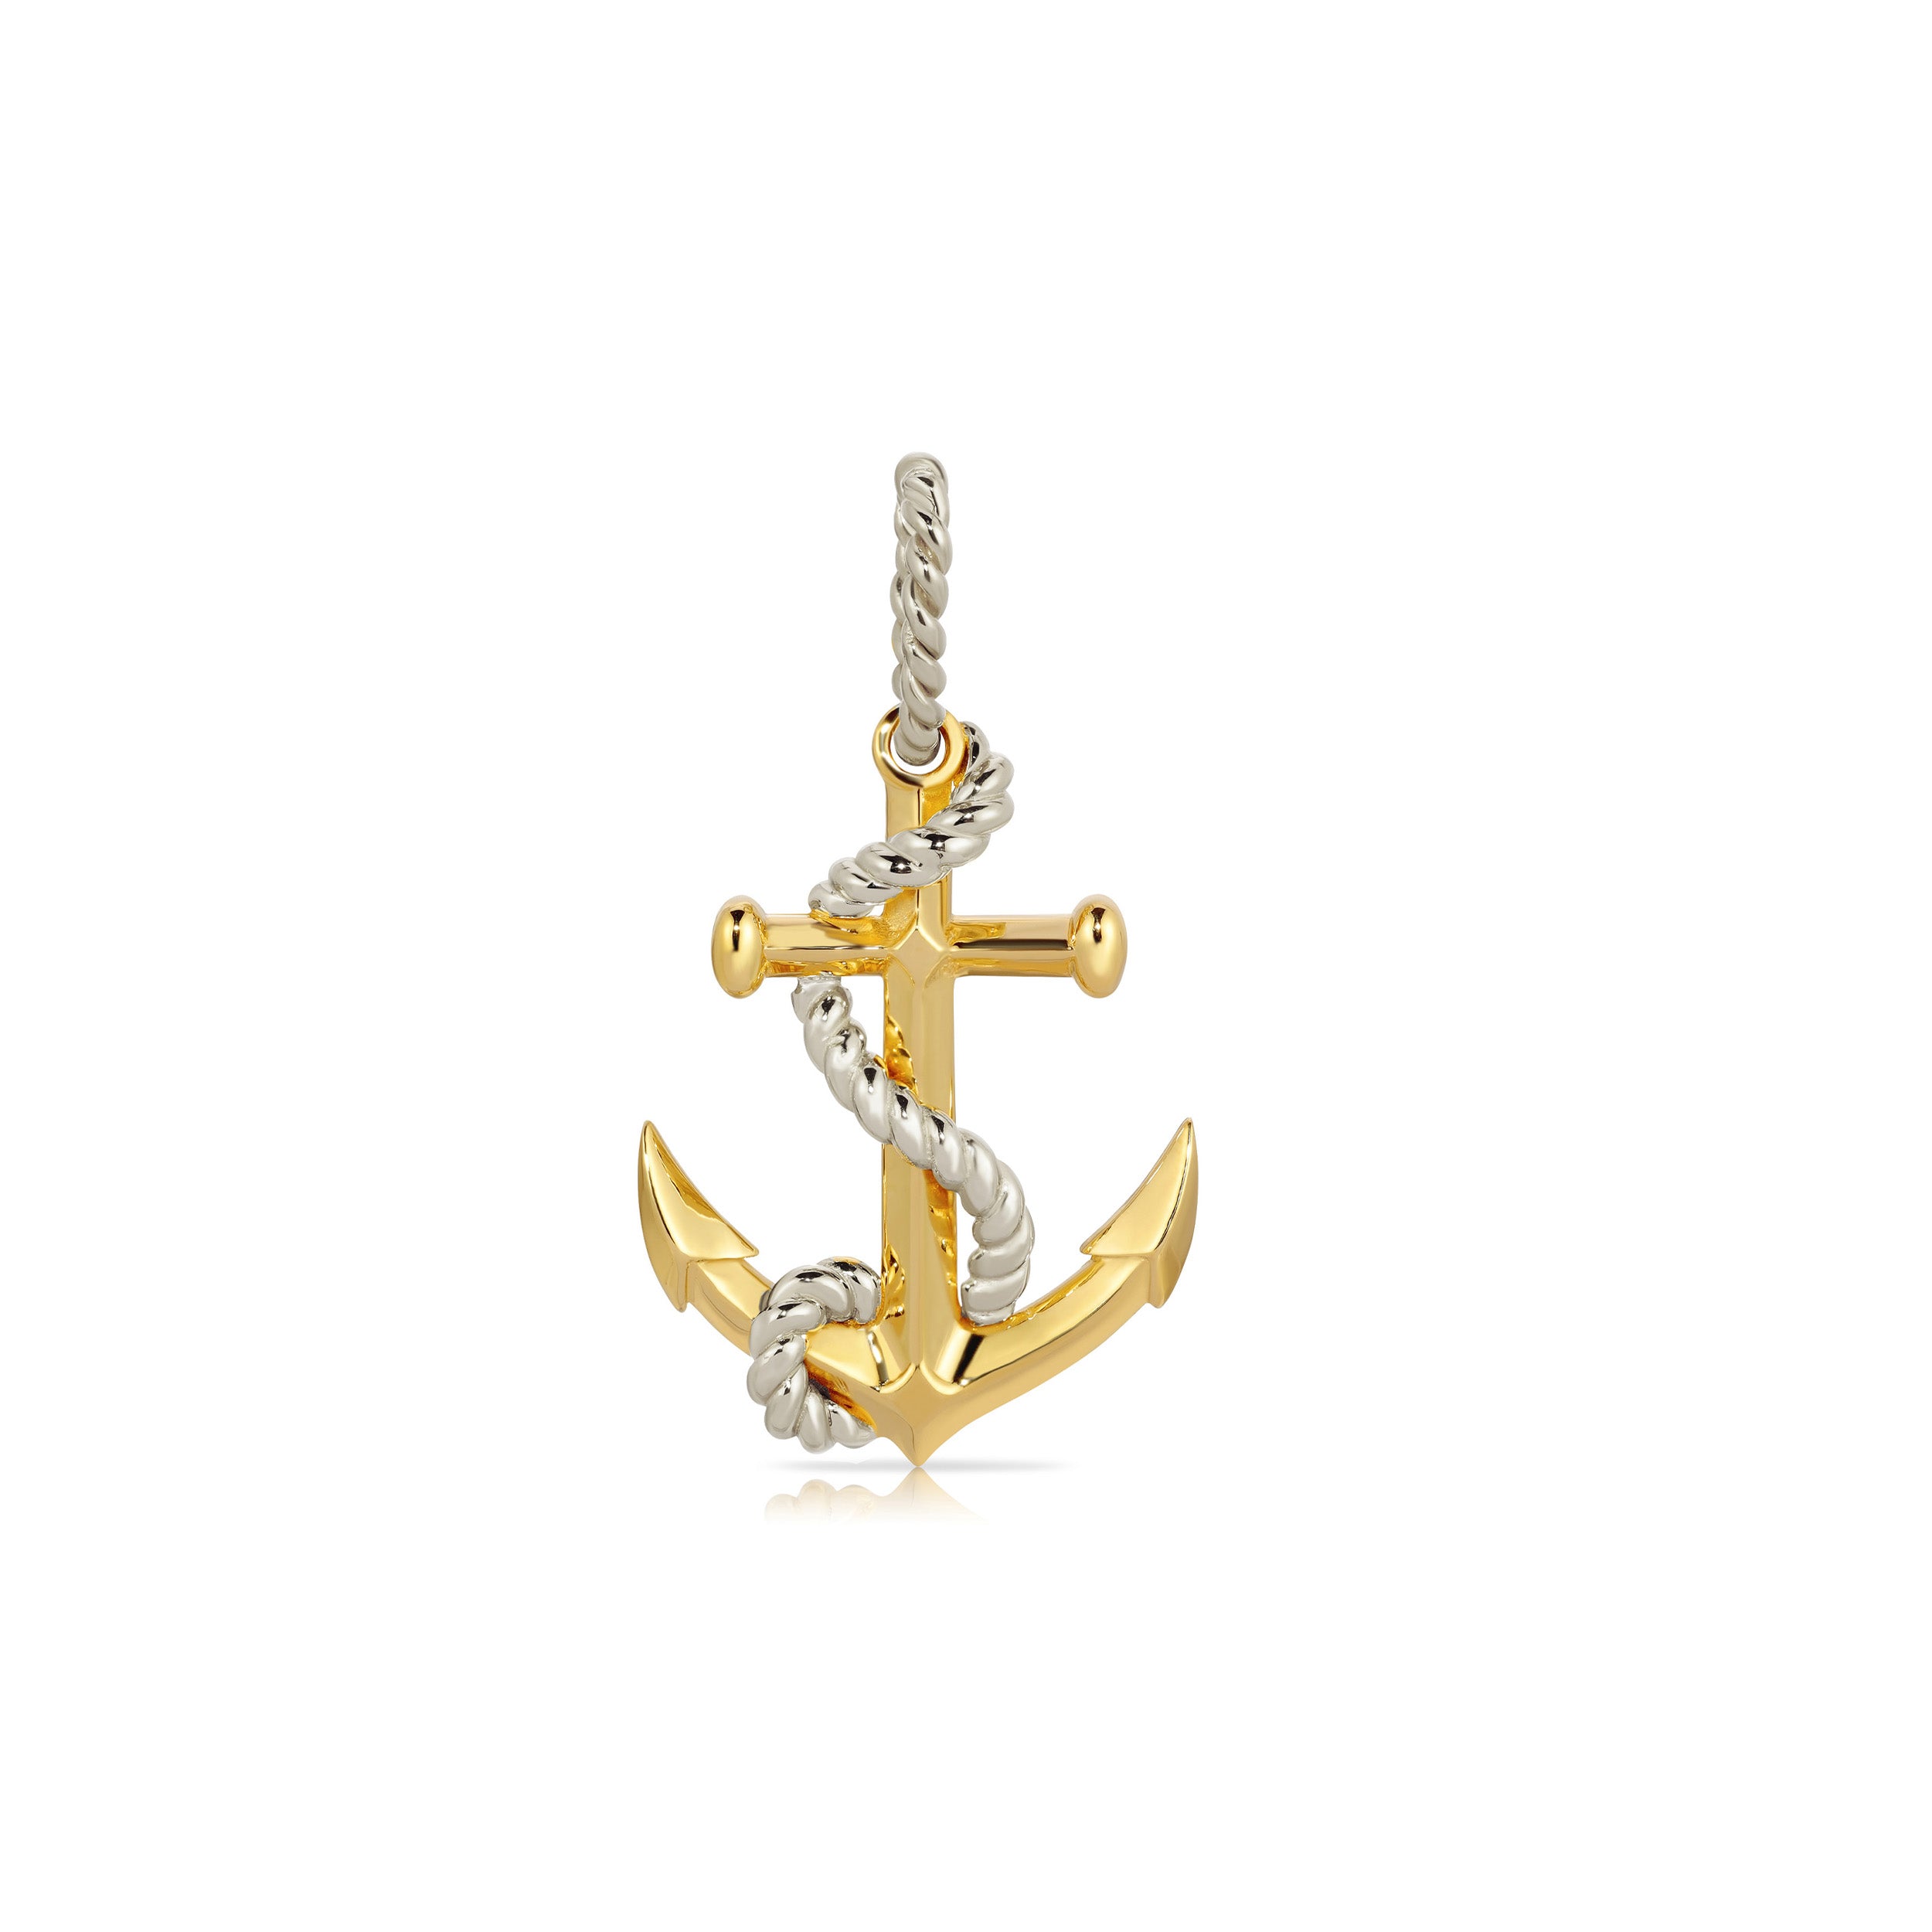 Gold Anchor Pendant Necklace by JW Anderson on Sale